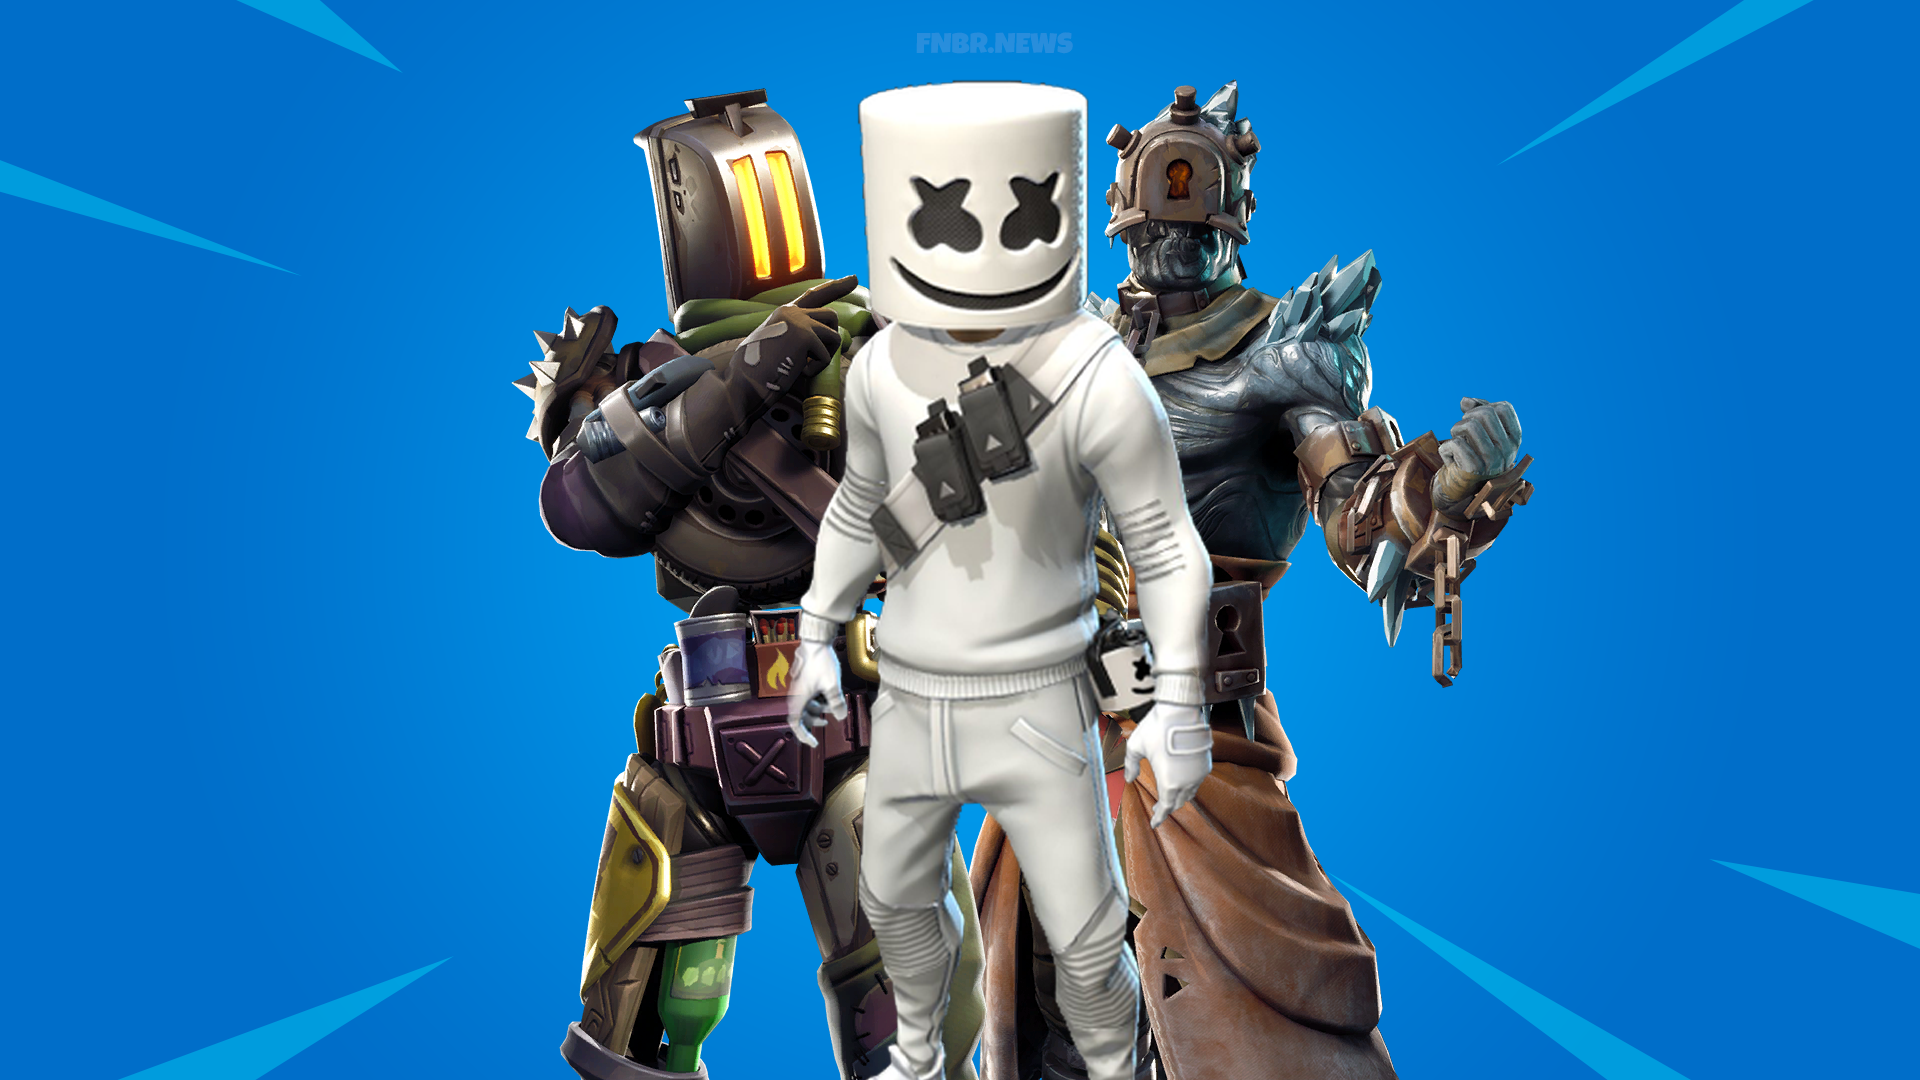 Fortnite Patch V7 30 All Leaked Cosmetics Skins Emotes Wraps Fortnite News The keep it mello dance is earned by completing one of the showtime challenges. fortnite patch v7 30 all leaked